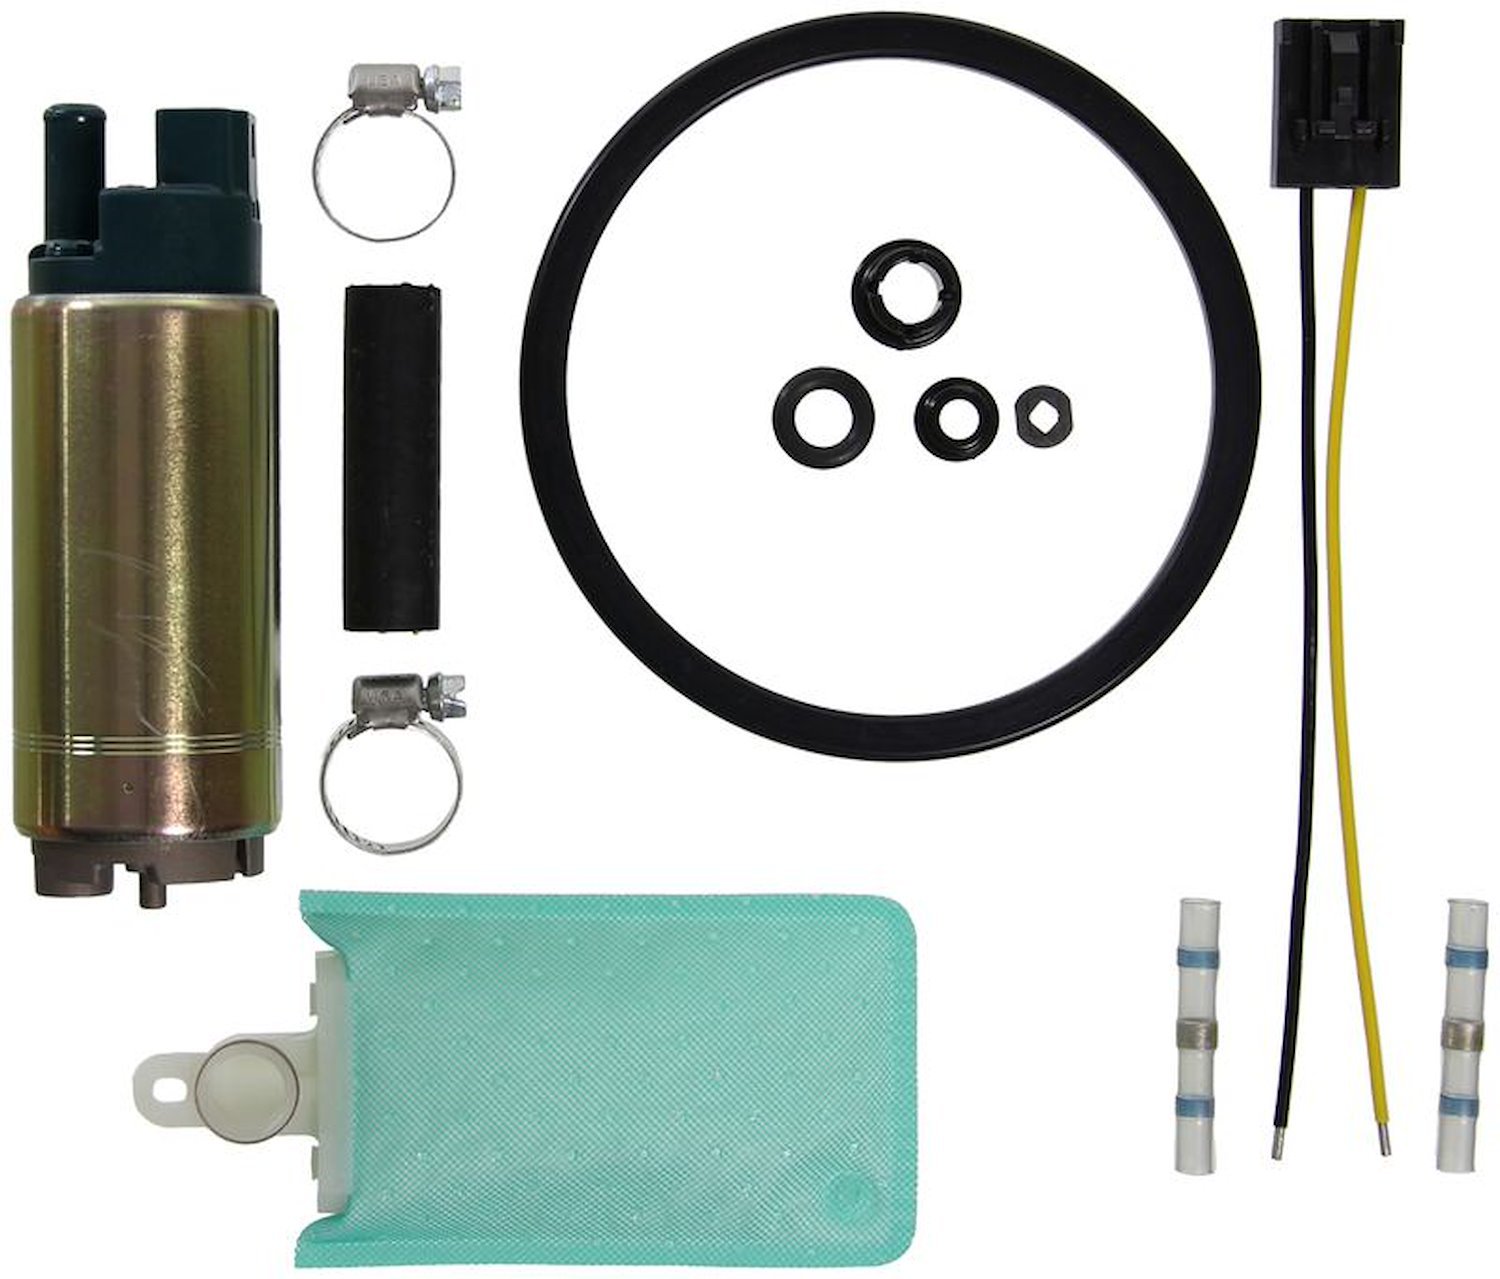 EFI In-Tank Electric Fuel Pump And Strainer Set for 1997-2012 Lexus/Toyota